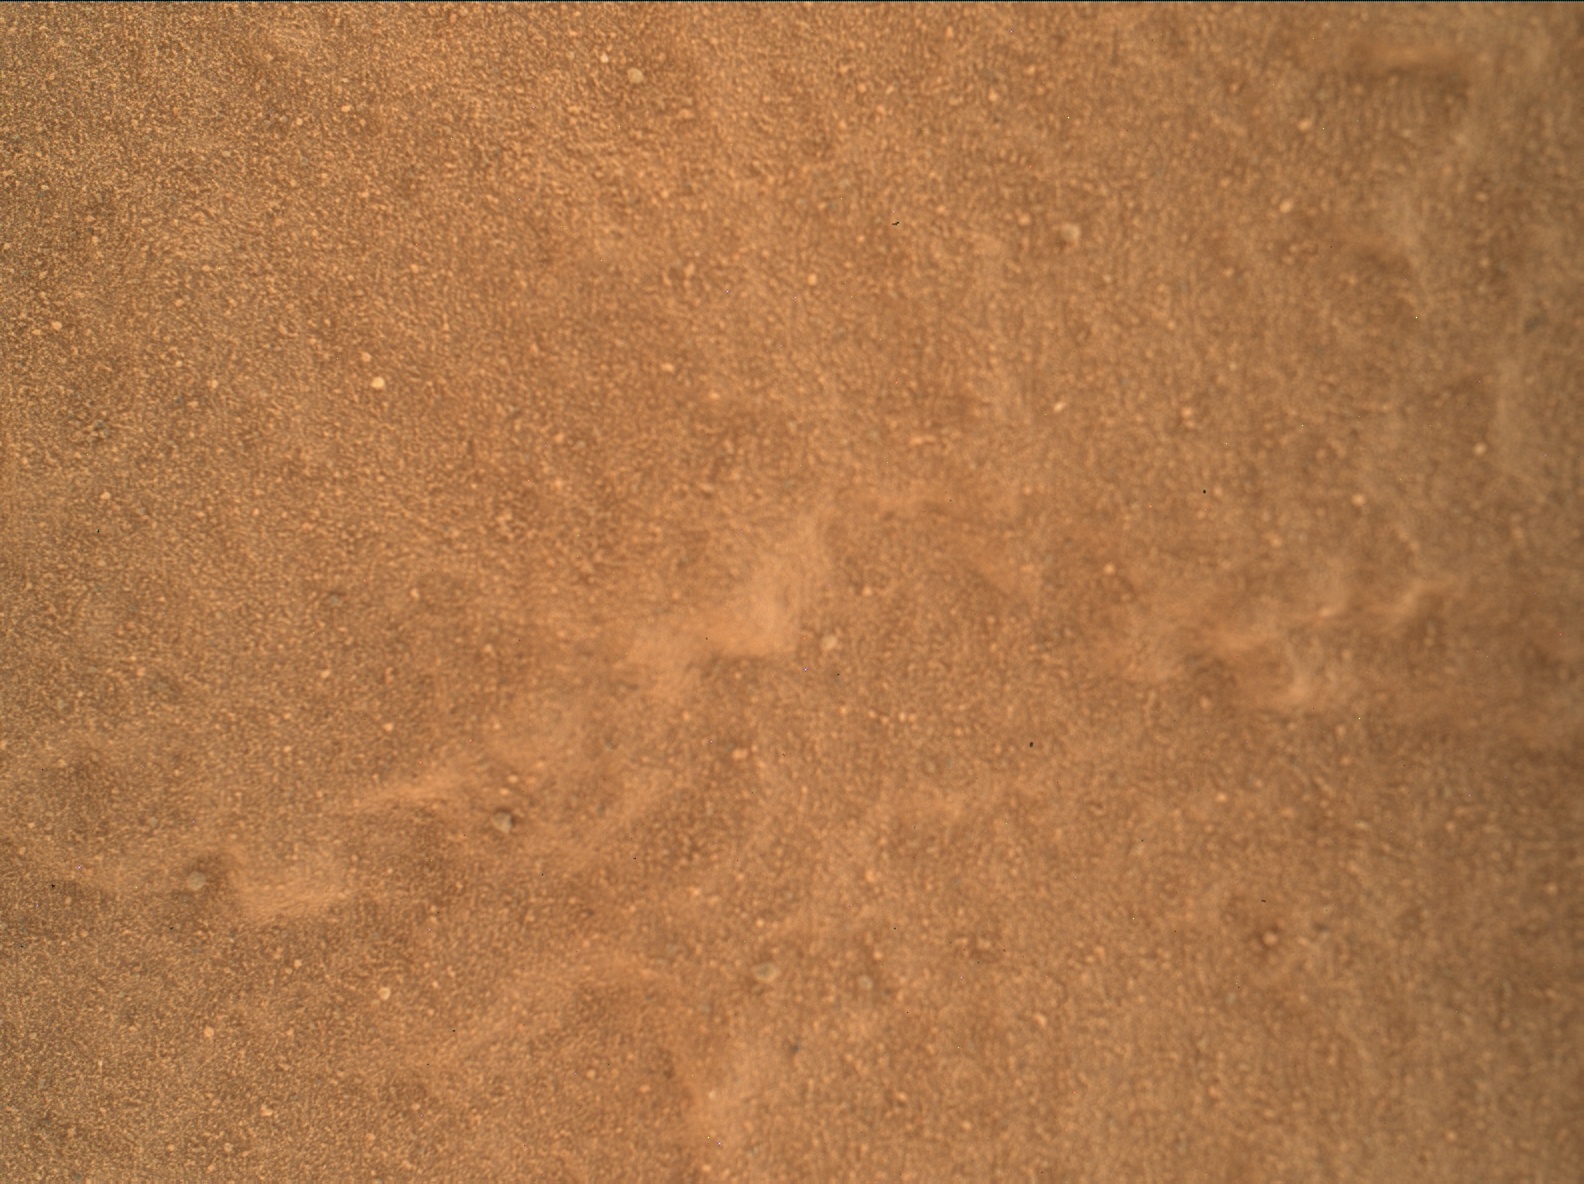 Nasa's Mars rover Curiosity acquired this image using its Mars Hand Lens Imager (MAHLI) on Sol 1830